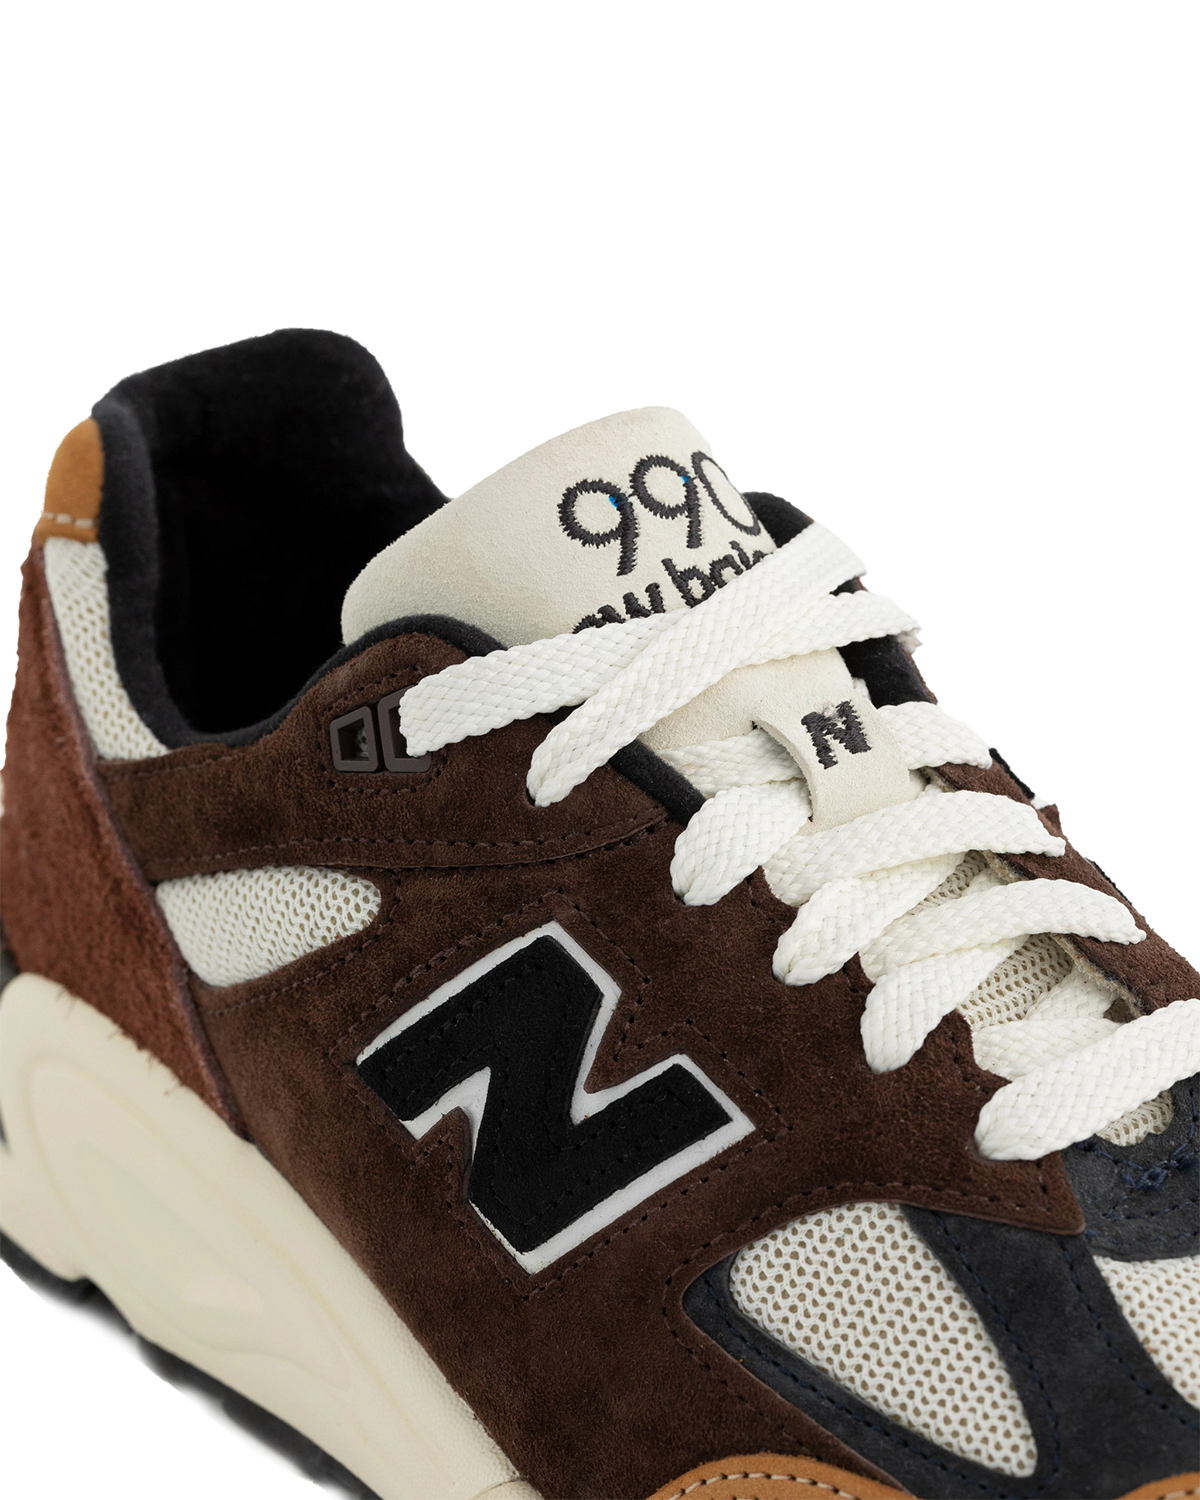 990v2 Made in USA 'Brown'